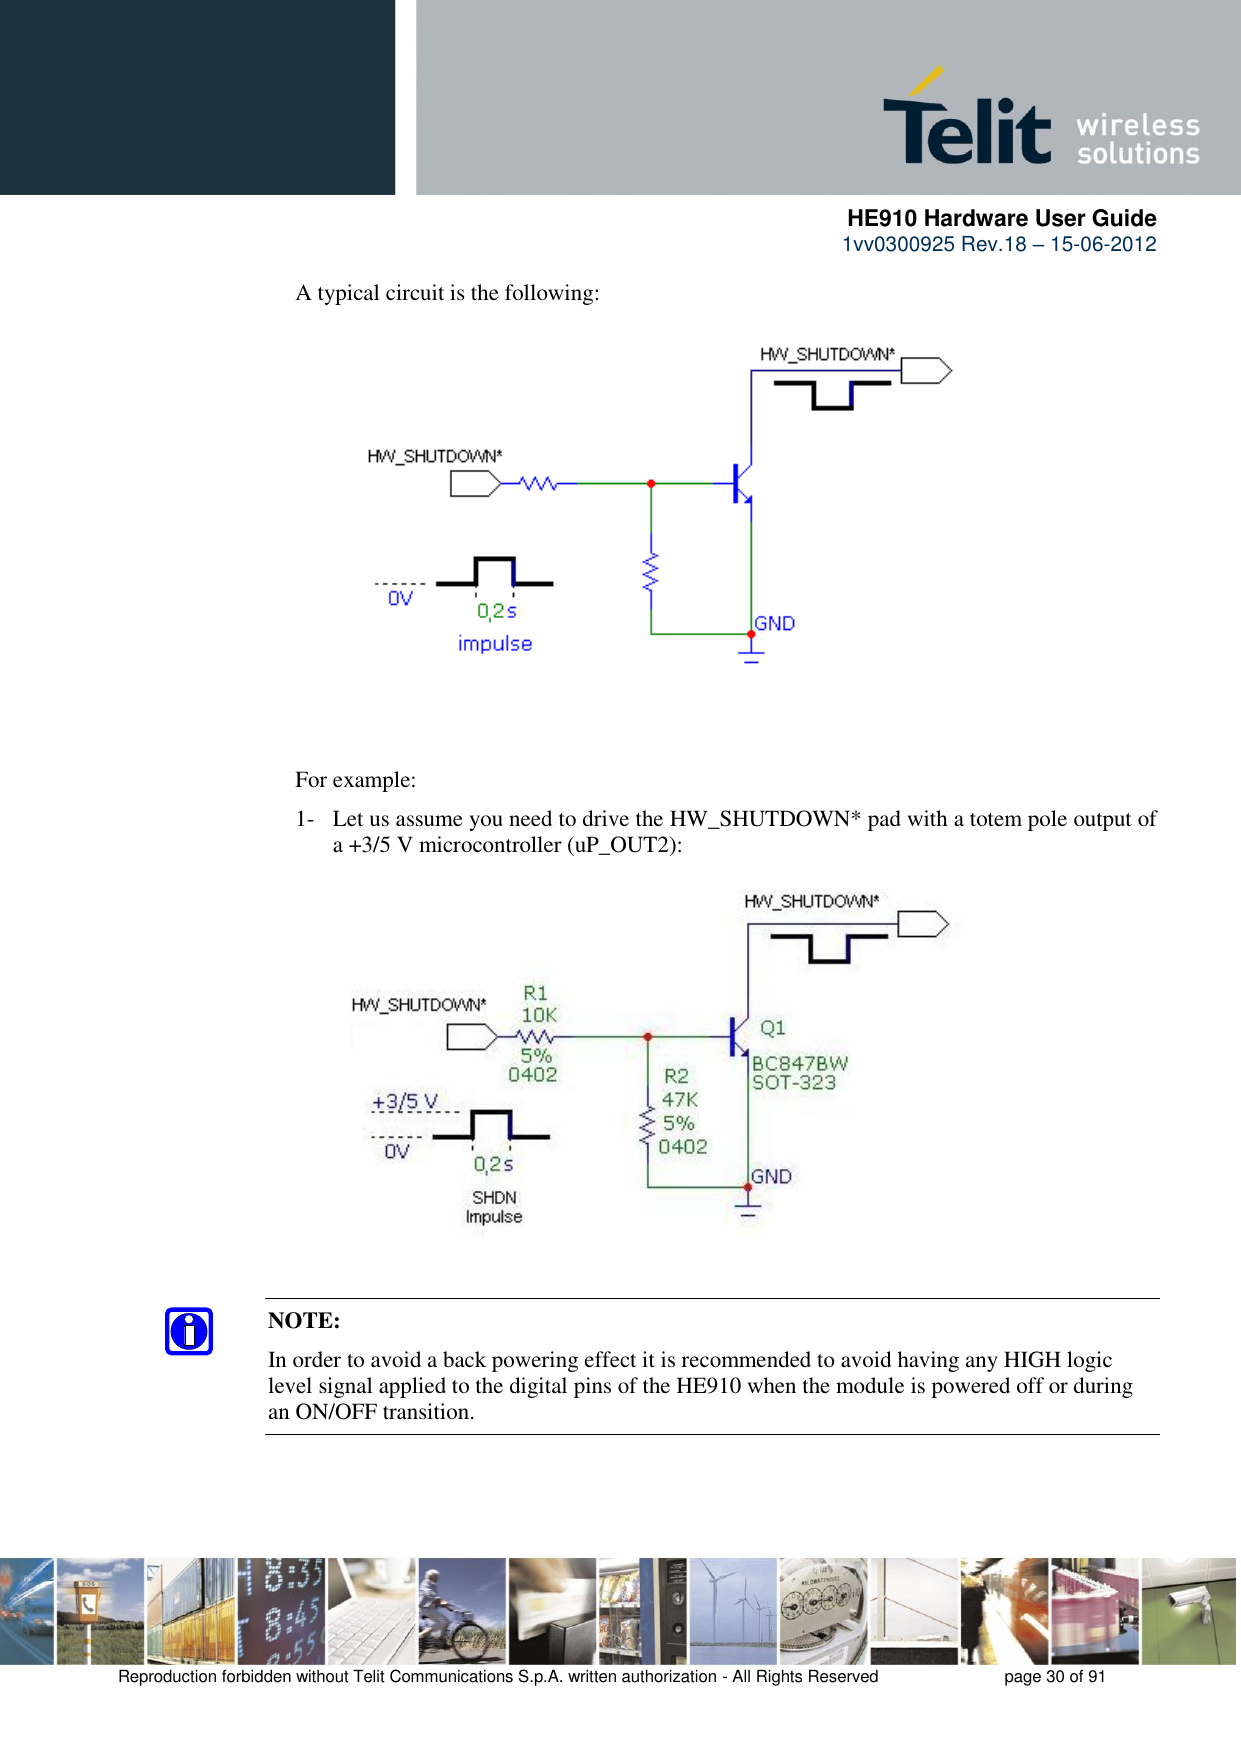      HE910 Hardware User Guide 1vv0300925 Rev.18 – 15-06-2012    Reproduction forbidden without Telit Communications S.p.A. written authorization - All Rights Reserved    page 30 of 91  A typical circuit is the following: For example: 1- Let us assume you need to drive the HW_SHUTDOWN* pad with a totem pole output of a +3/5 V microcontroller (uP_OUT2): NOTE: In order to avoid a back powering effect it is recommended to avoid having any HIGH logic level signal applied to the digital pins of the HE910 when the module is powered off or during an ON/OFF transition.    